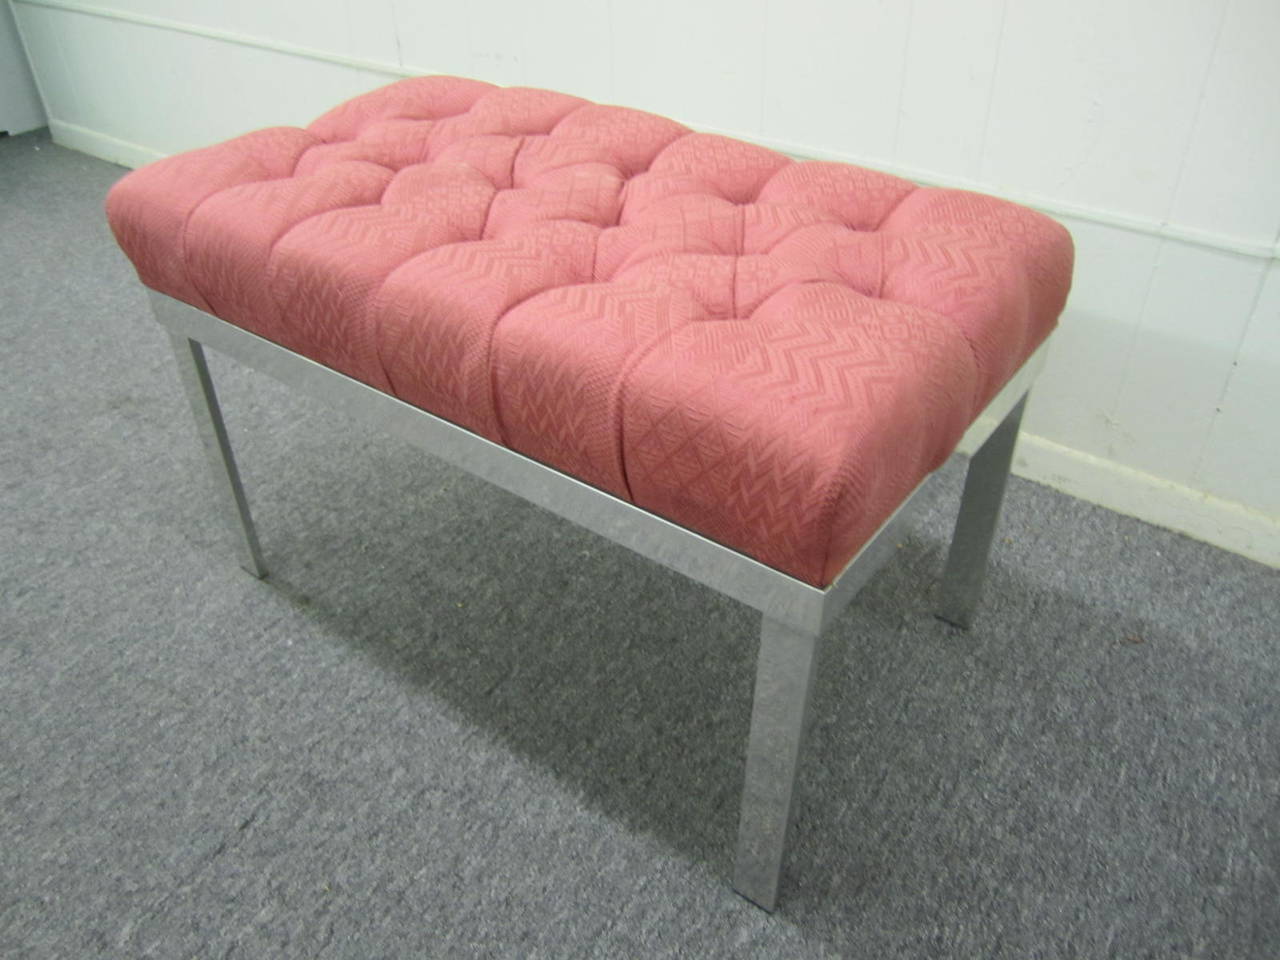 Lovely Milo Baughman style tufted bench with an aluminum frame.  The seat cushion is very comfortable and stylish-would look great in front of a vanity or makeup station.  We love the mellow patina the aluminum base has acquired-great vintage vibe.